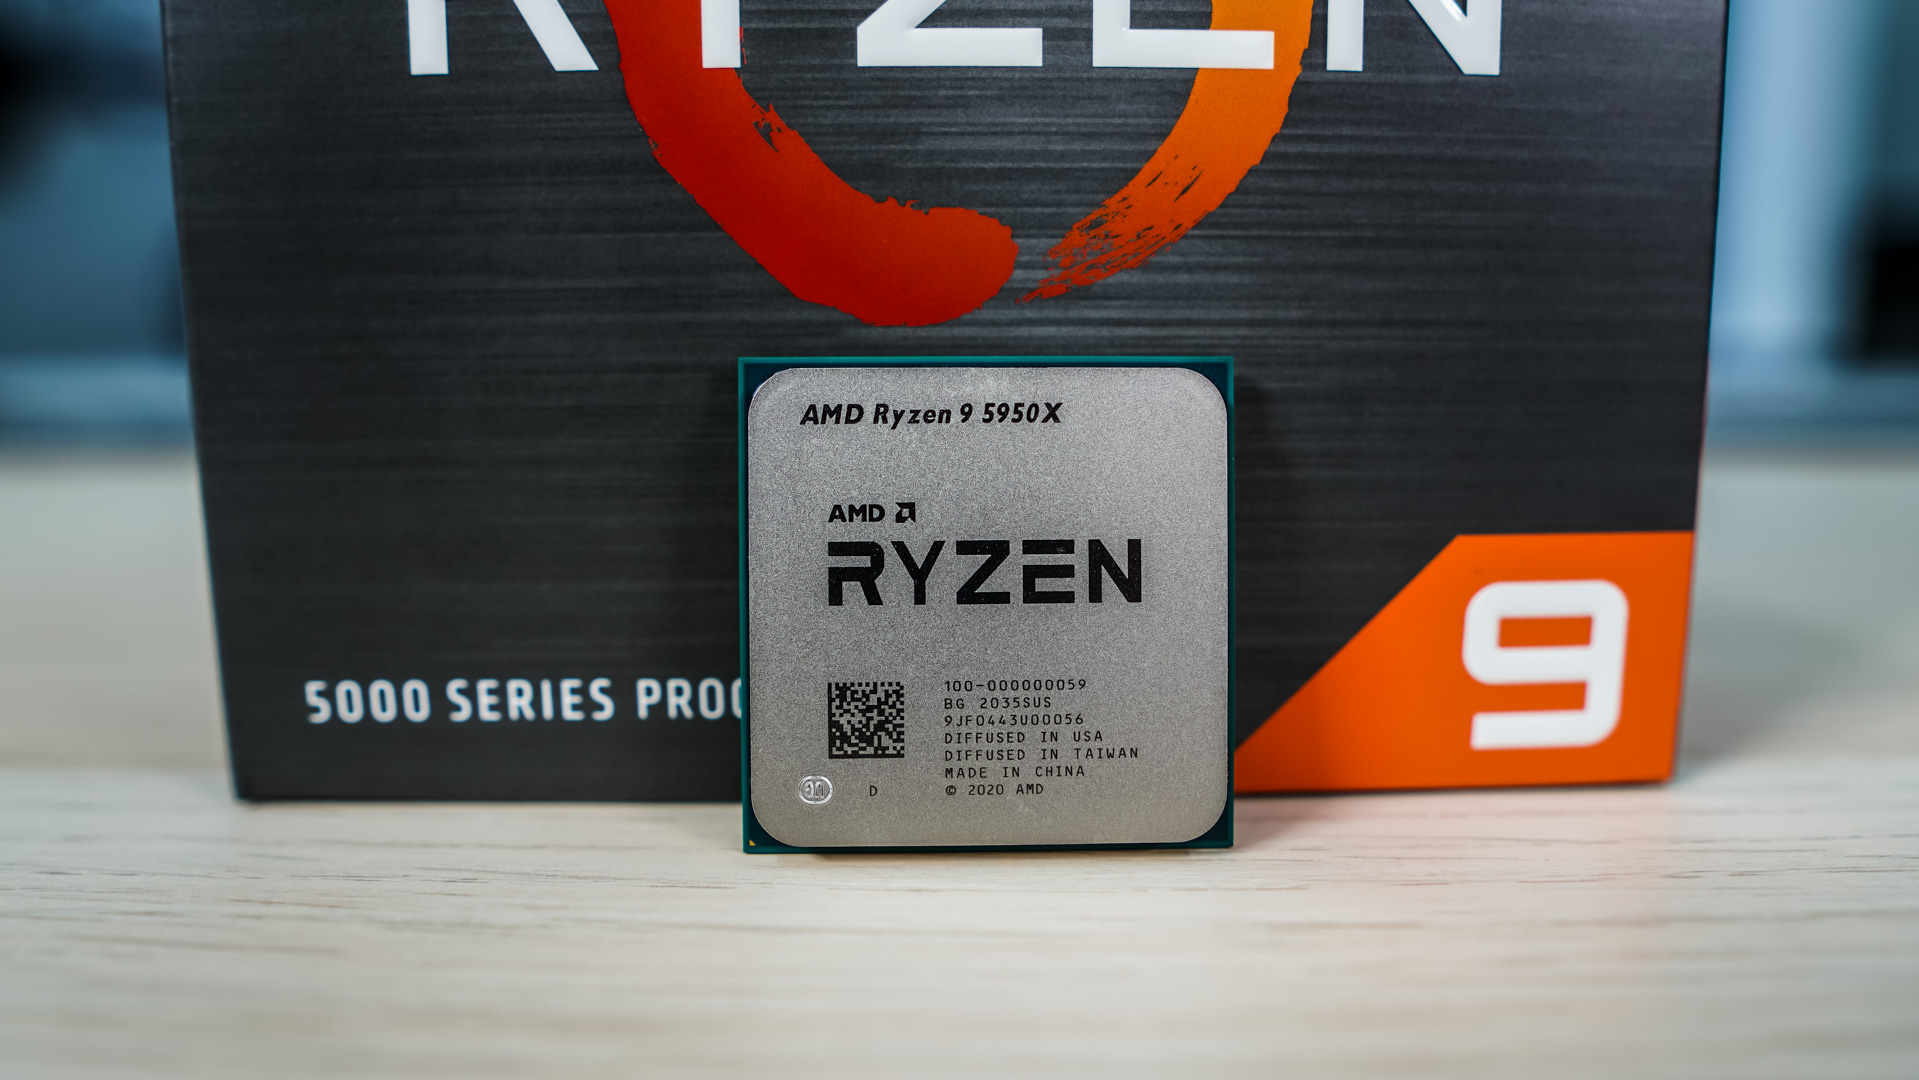 AMD Ryzen 9 5950X Processor Review - Page 9 of 10 - ThinkComputers.org